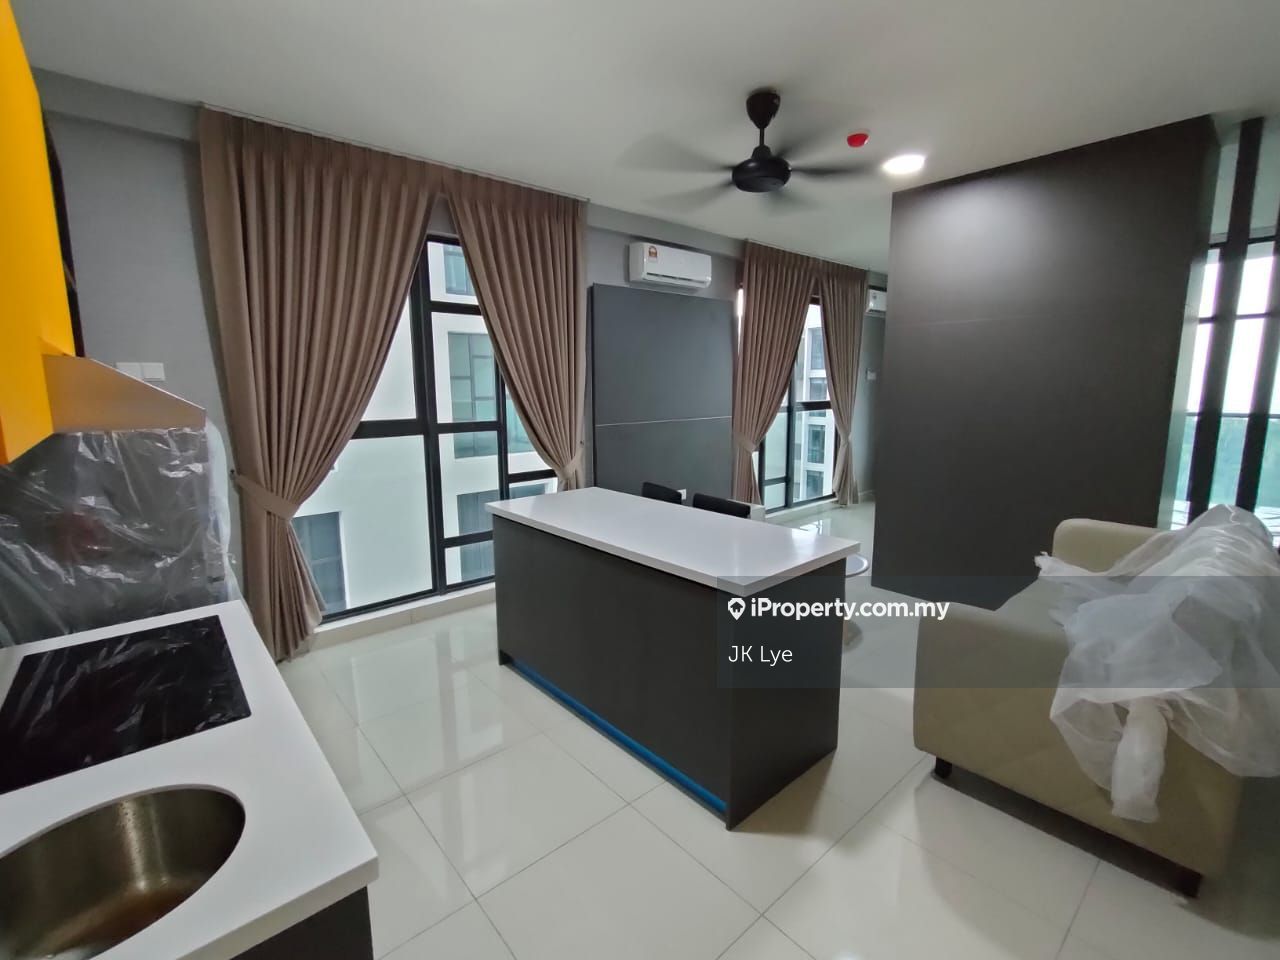 Liberty @ Arc Serviced Residence for rent in Ampang, Selangor ...